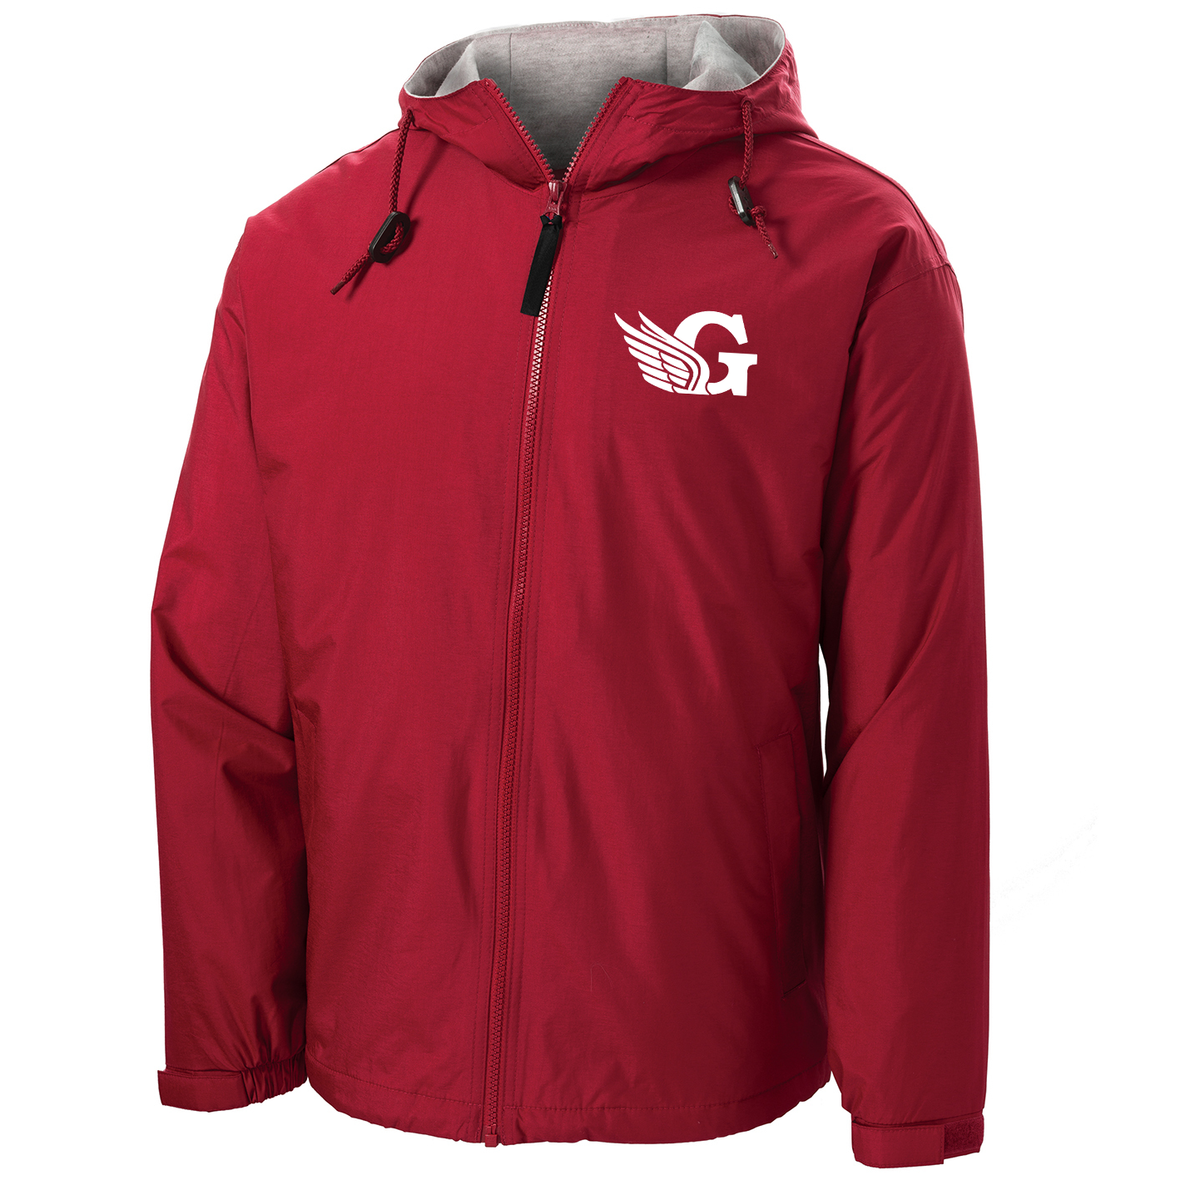 Greenwich HS Track Hooded Jacket